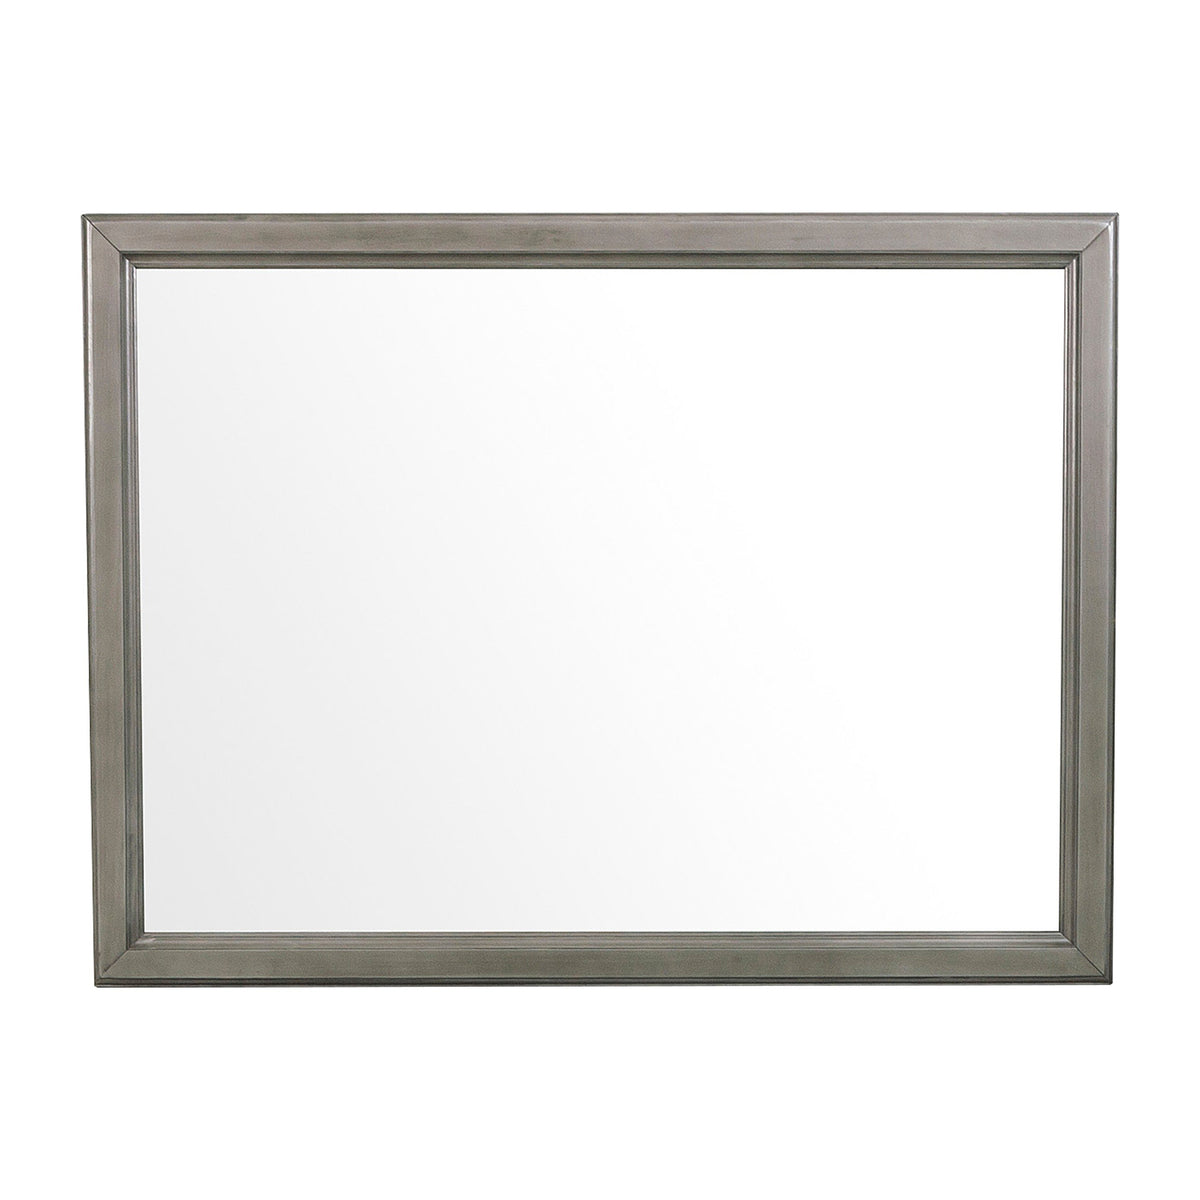 Wooden Square Mirror with Molded Details and Dual Texture, Gray - BM222706